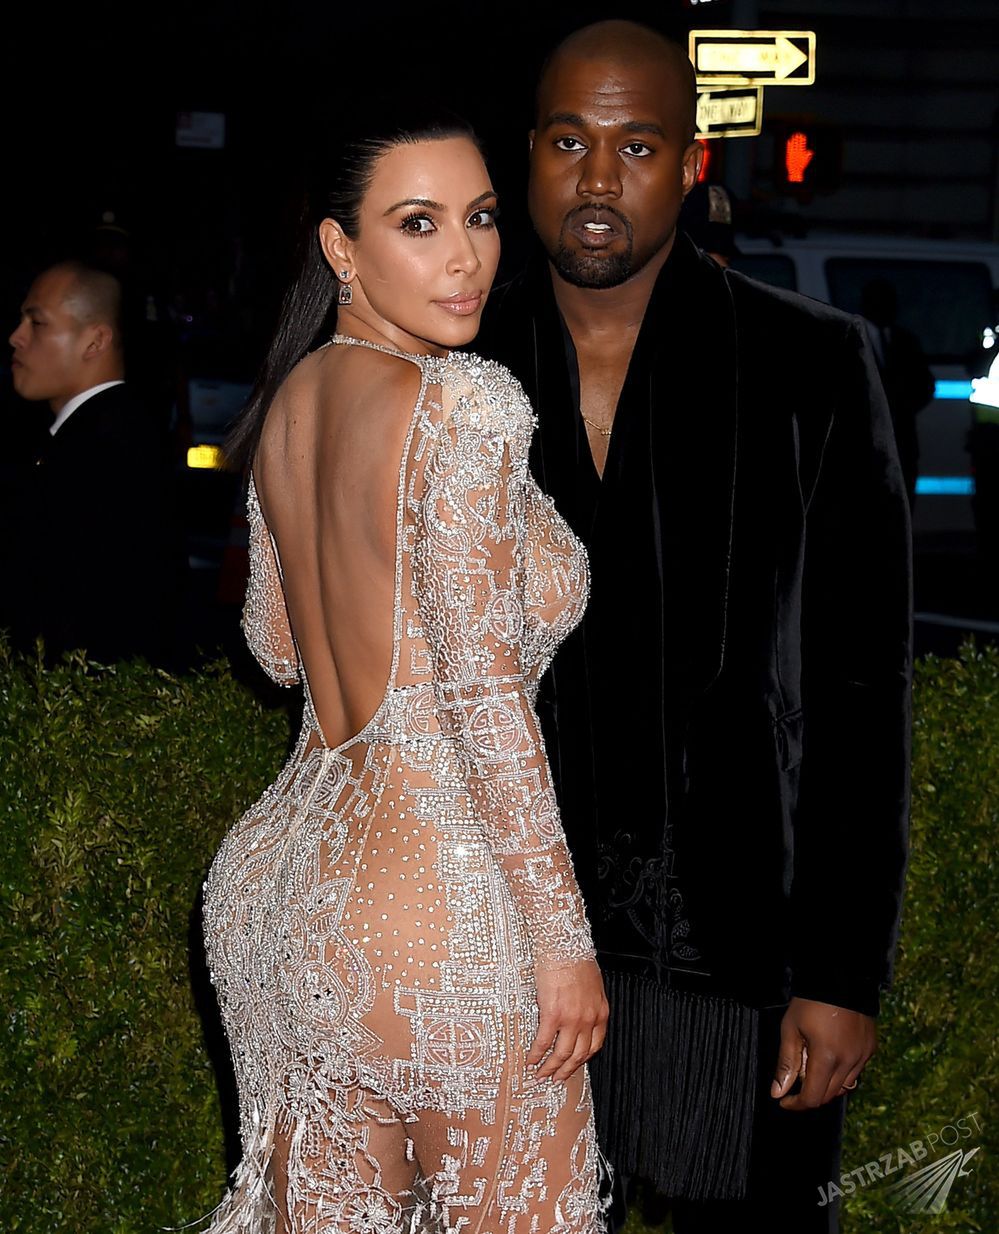 May 4, 2015 New York City, NY
Kim Kardashian and Kanye West
Costume Institute Benefit celebrating the opening of 'China: Through the Looking Glass' held at The Metropolitan Museum of Art.
© Arroyo-OConnor / AFF-USA.COM